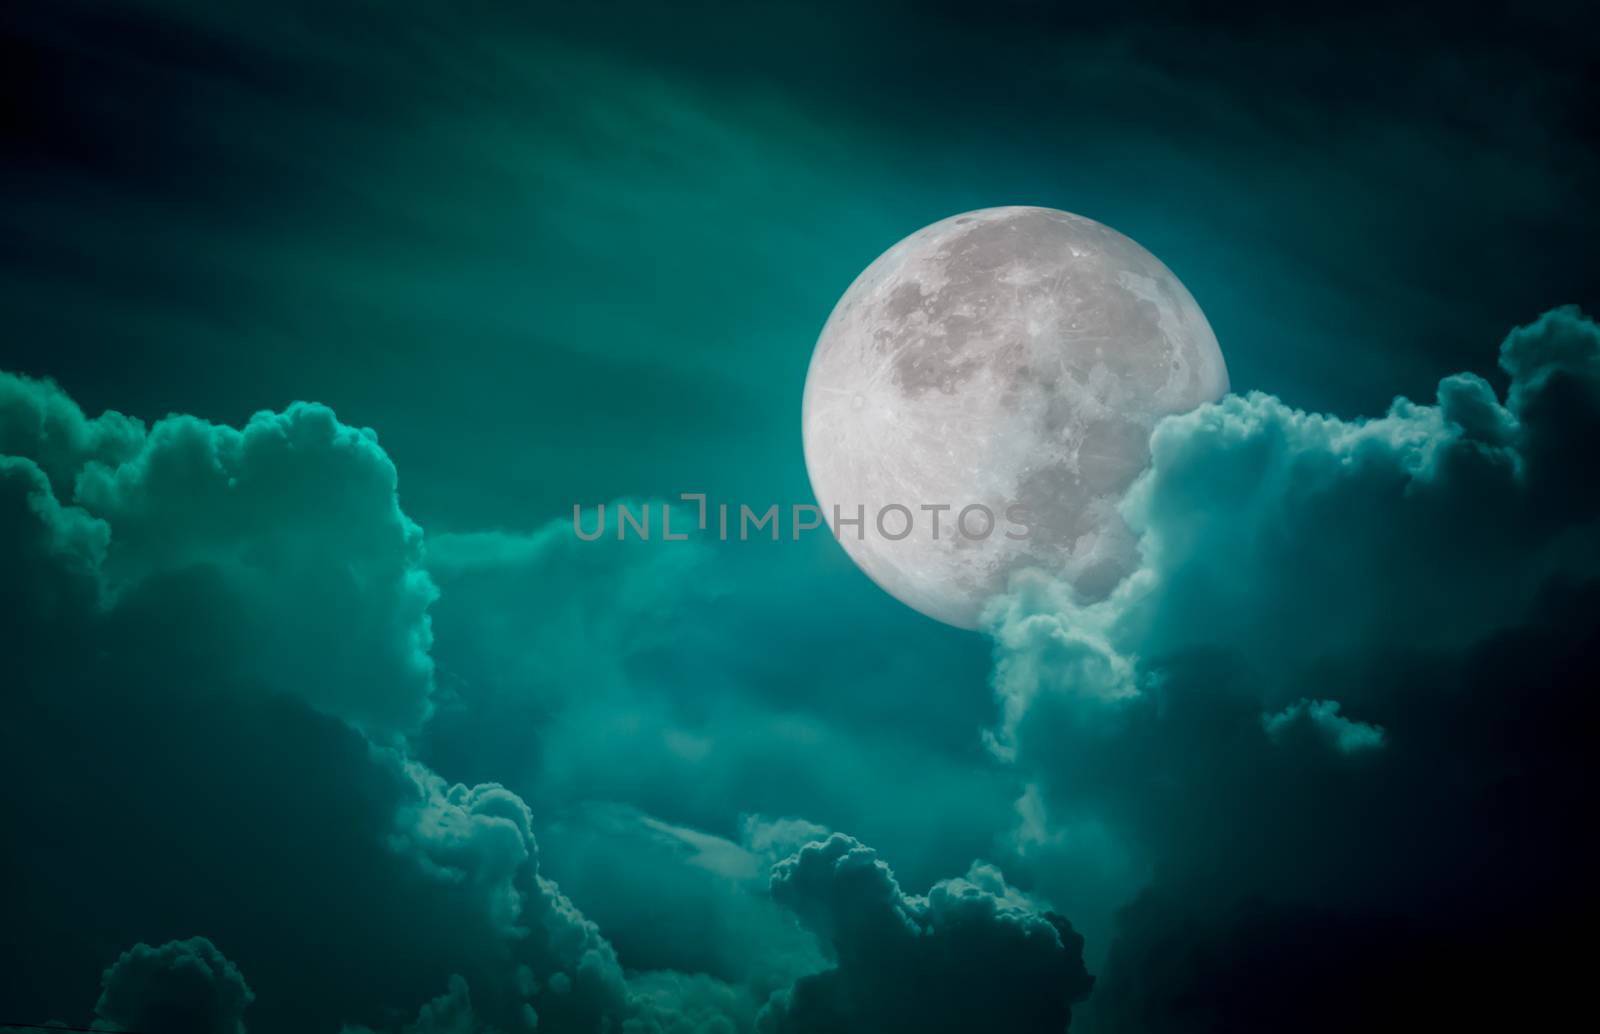 Attractive photo of a nighttime green sky with clouds, bright full moon would make a great background. Nightly sky with large moon. Beautiful nature use as background. Outdoors.